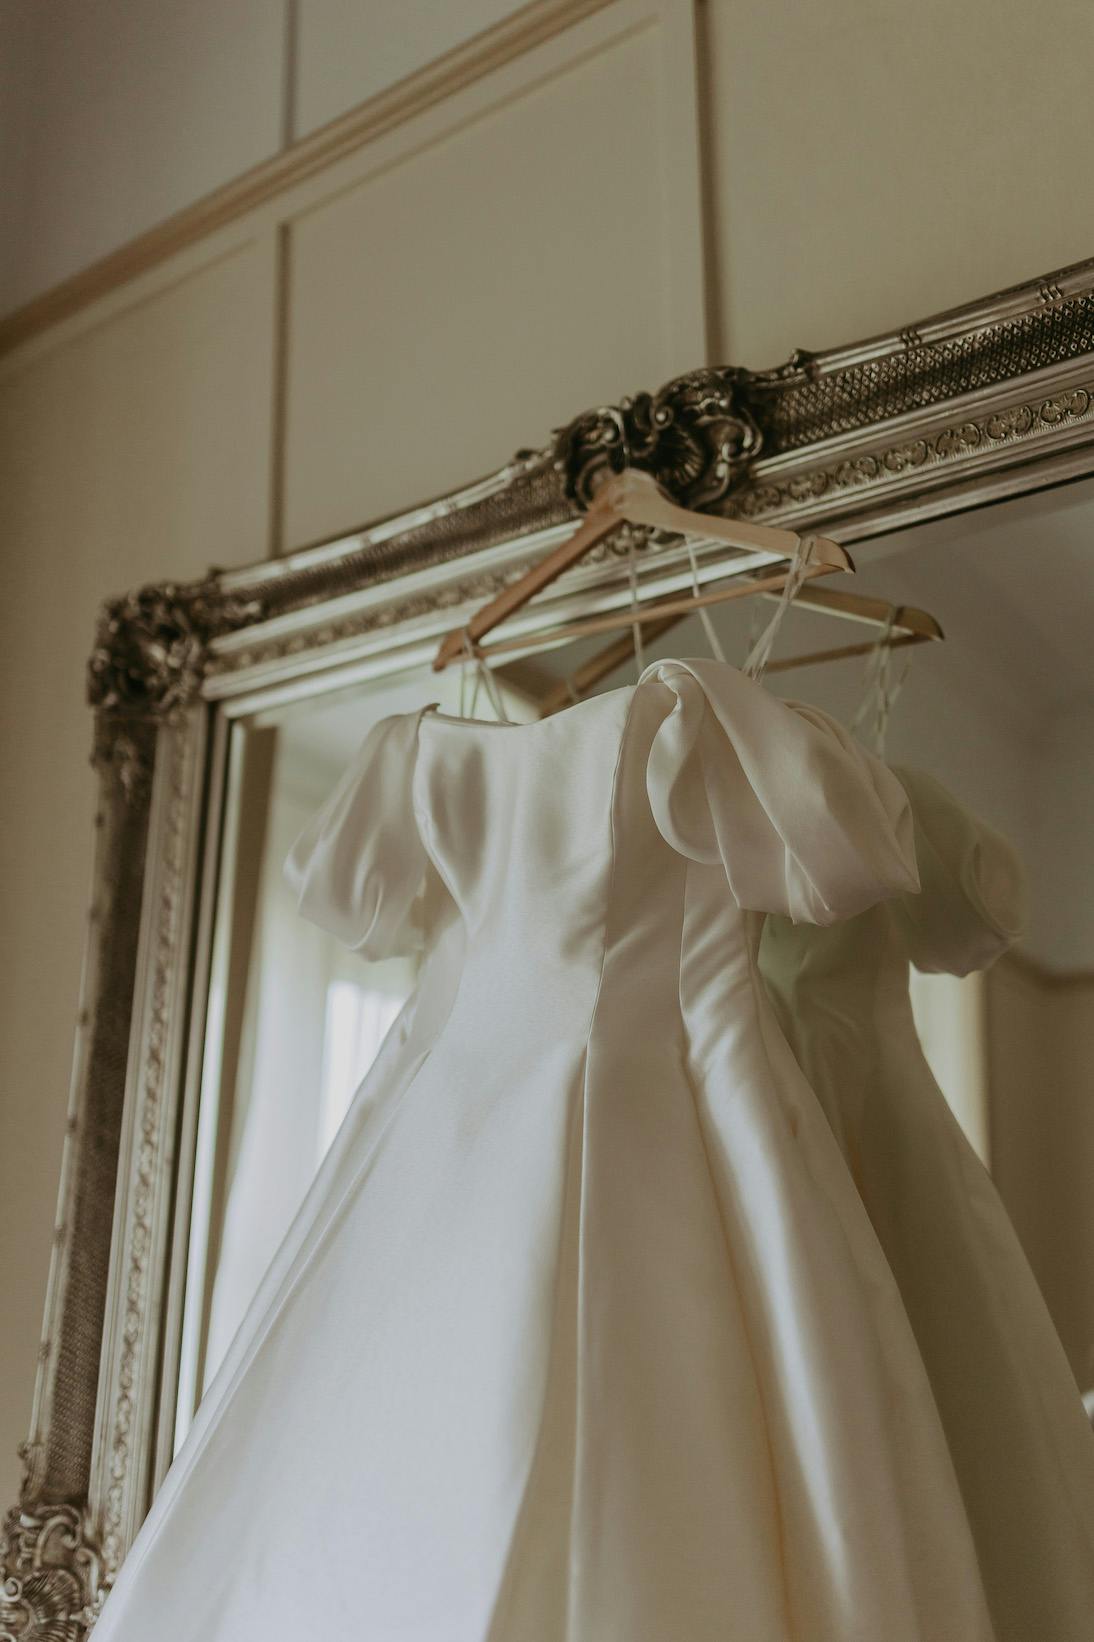 A white satin wedding dress with short puffy sleeves hangs on a wooden hanger in front of an ornate, large vintage mirror with a detailed silver frame. The dress reflects softly in the mirror, creating a romantic and elegant atmosphere.